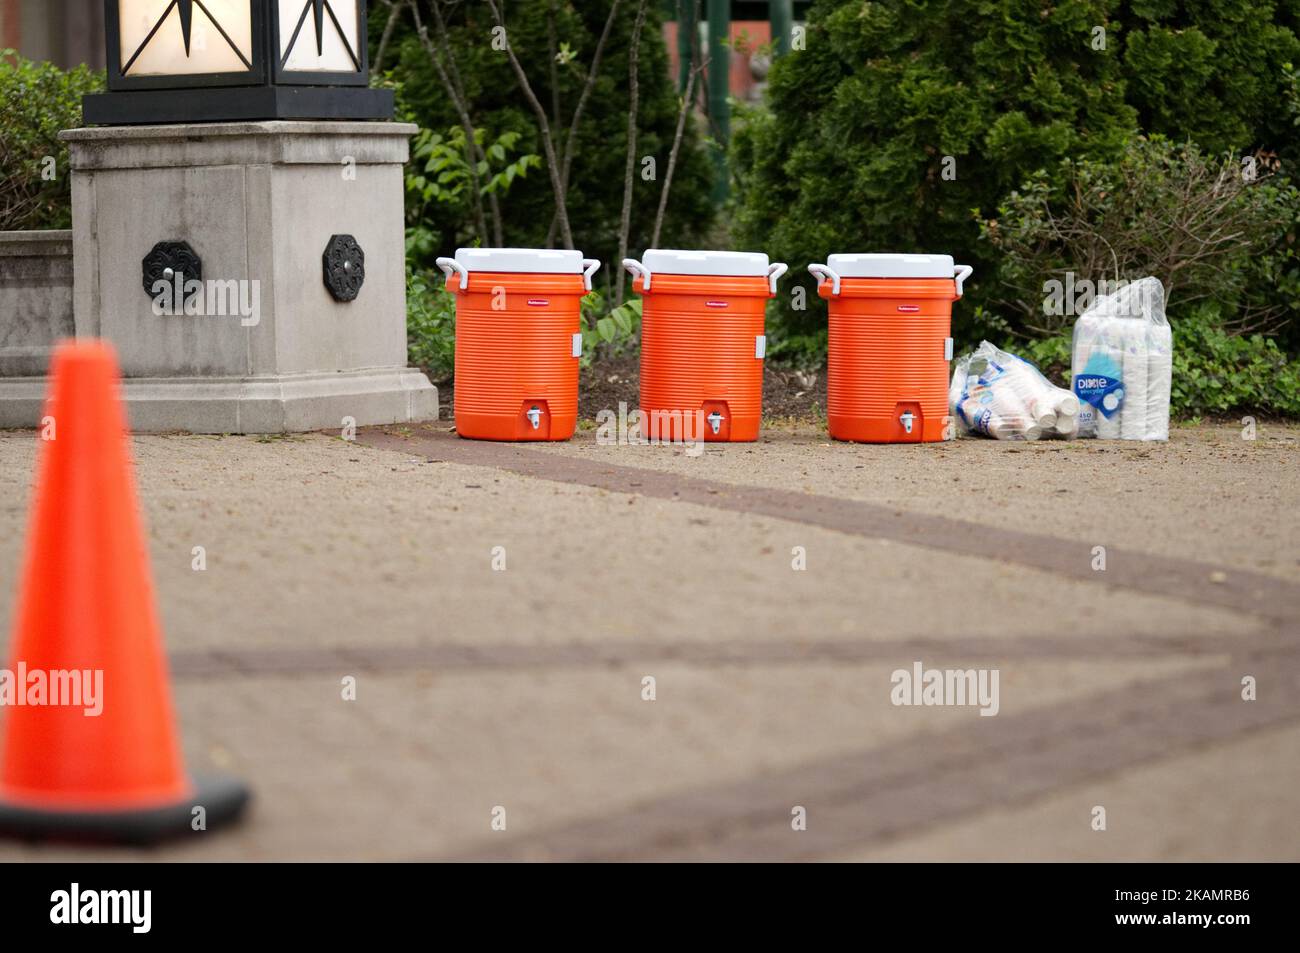 Water containers and cups form a drinking station as preparations are made for a leisure run in Harrisburg, PA, on April 30, 2017. Diminishing retail, crumbling infrastructure, environmental issues, poverty and unemployment are shown in a view on the current state of a section of rural America on day 101 of Trump's Presidency. The Keystone state Pennsylvania formed an important factor in Trump's victory in the 2016 US elections. (Photo by Bastiaan Slabbers/NurPhoto) *** Please Use Credit from Credit Field *** Stock Photo